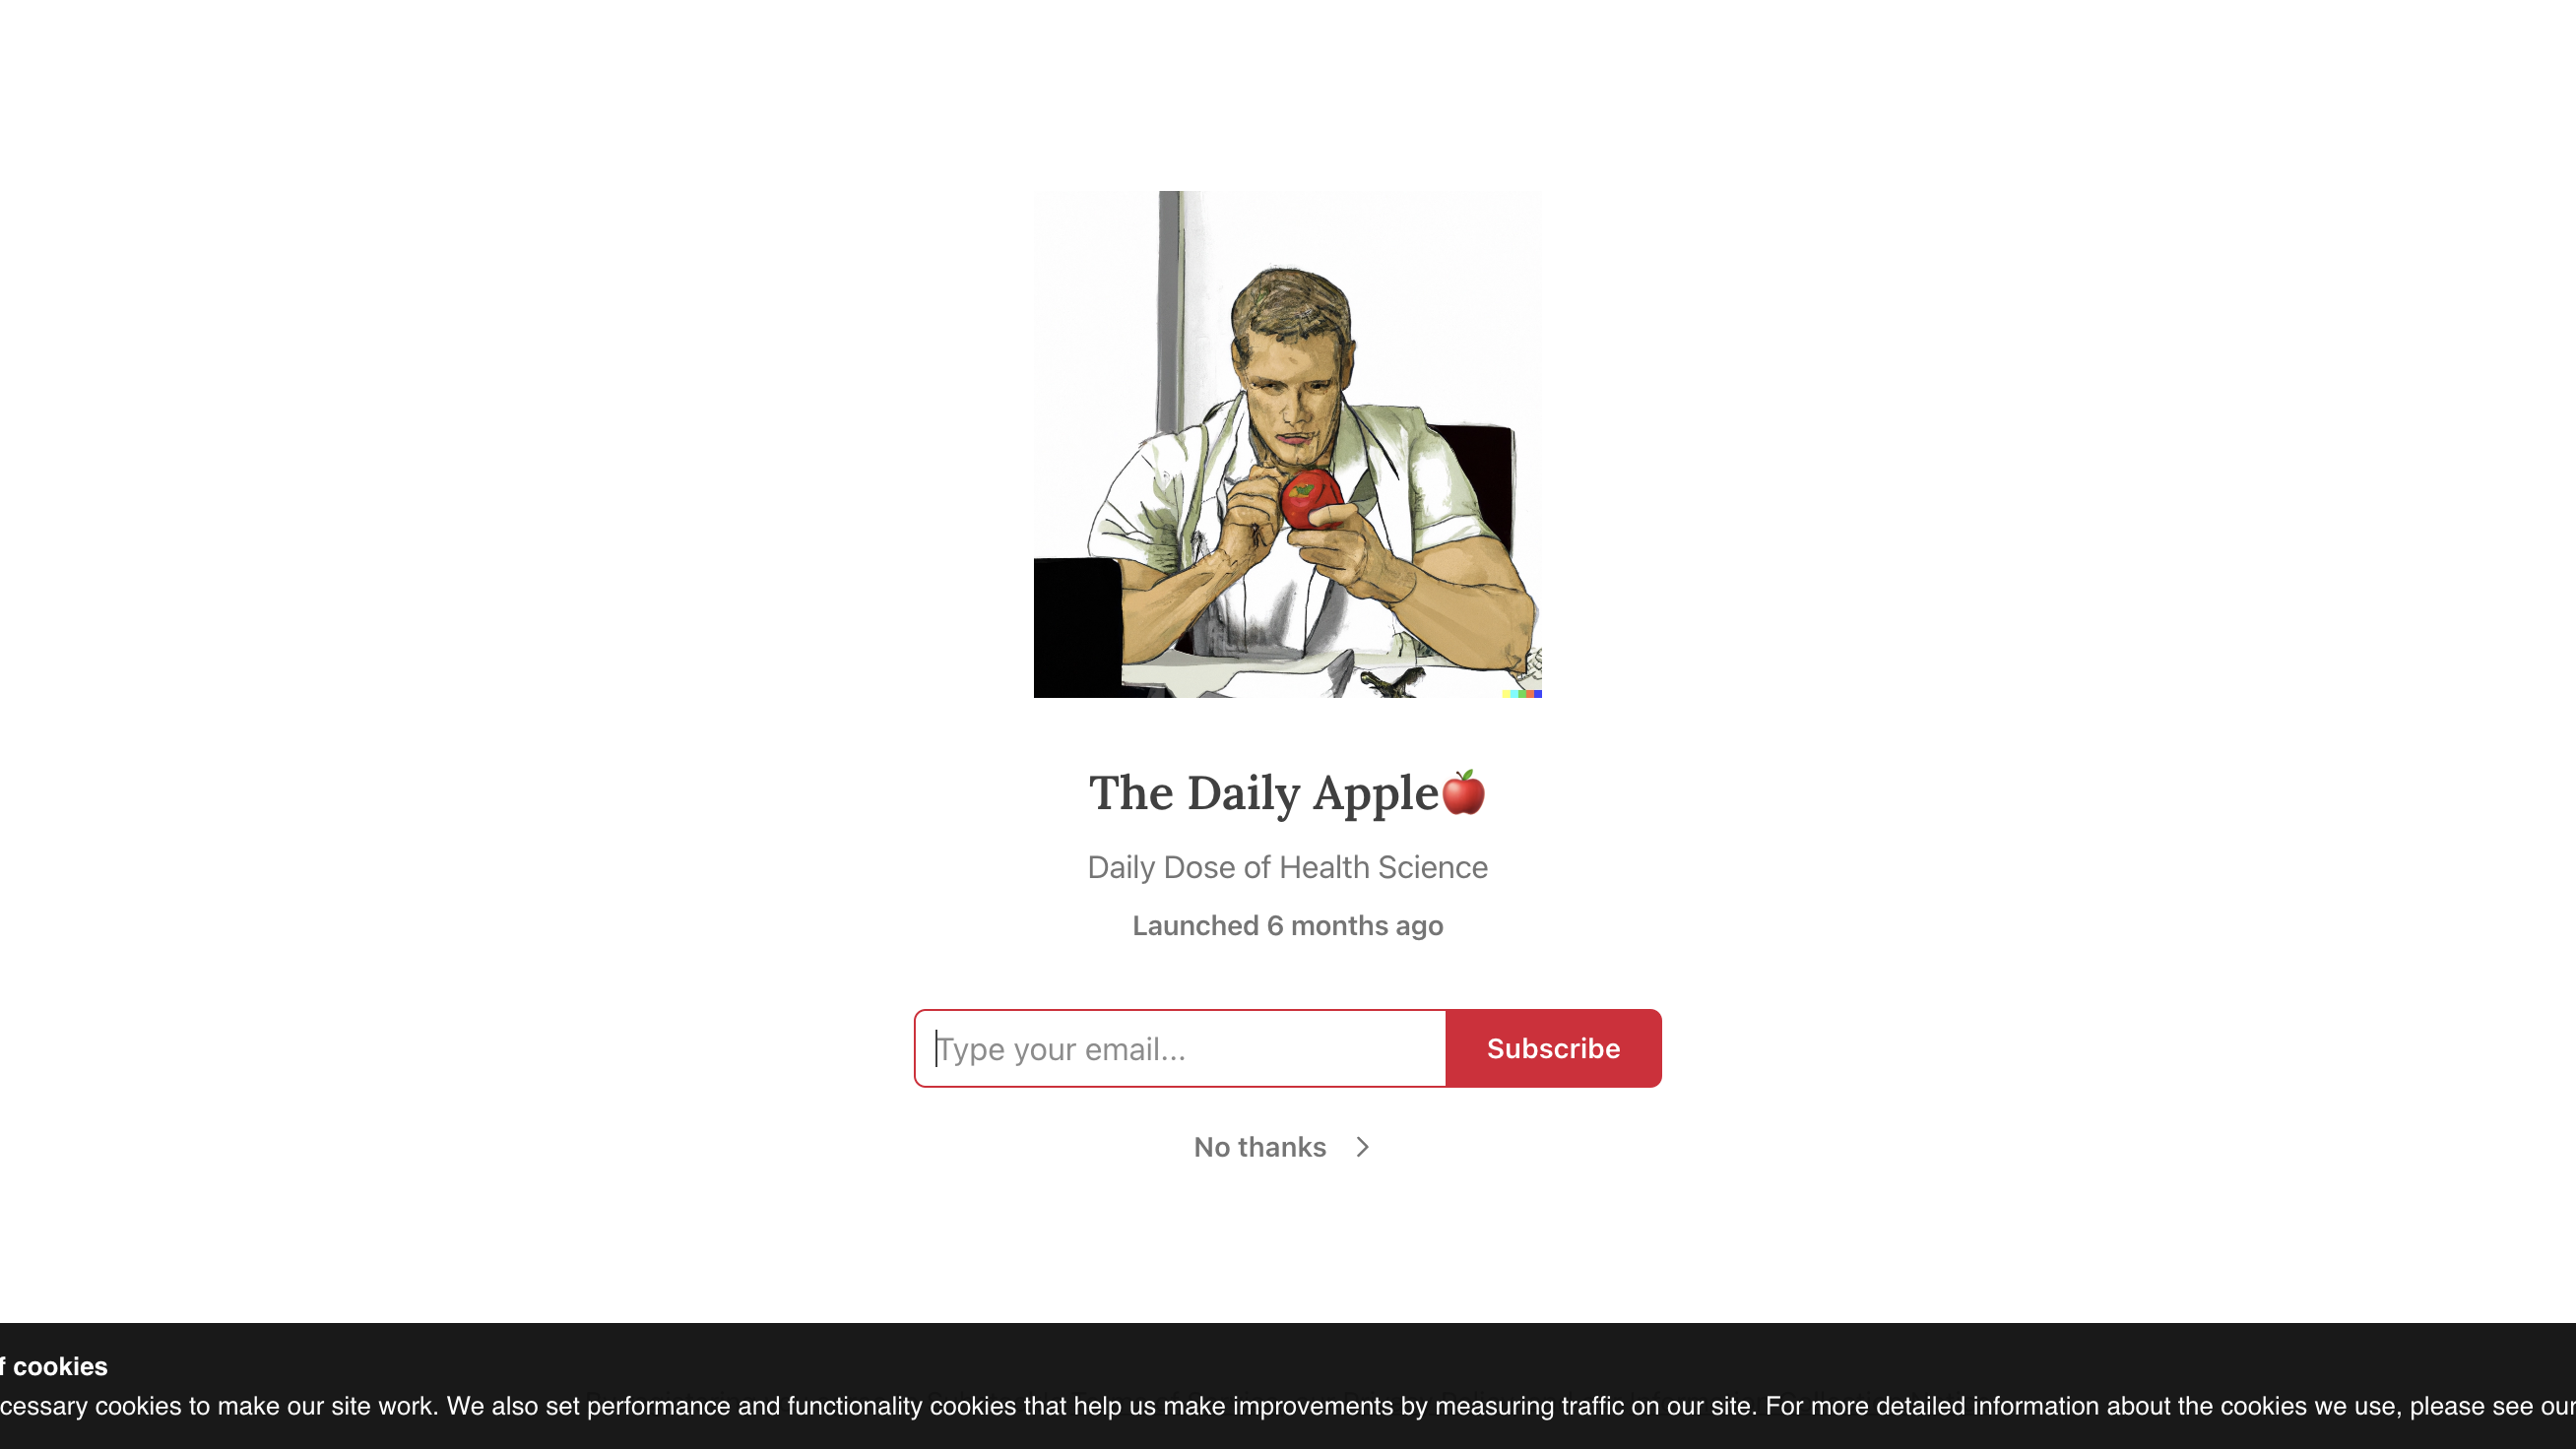 The Daily Apple homepage